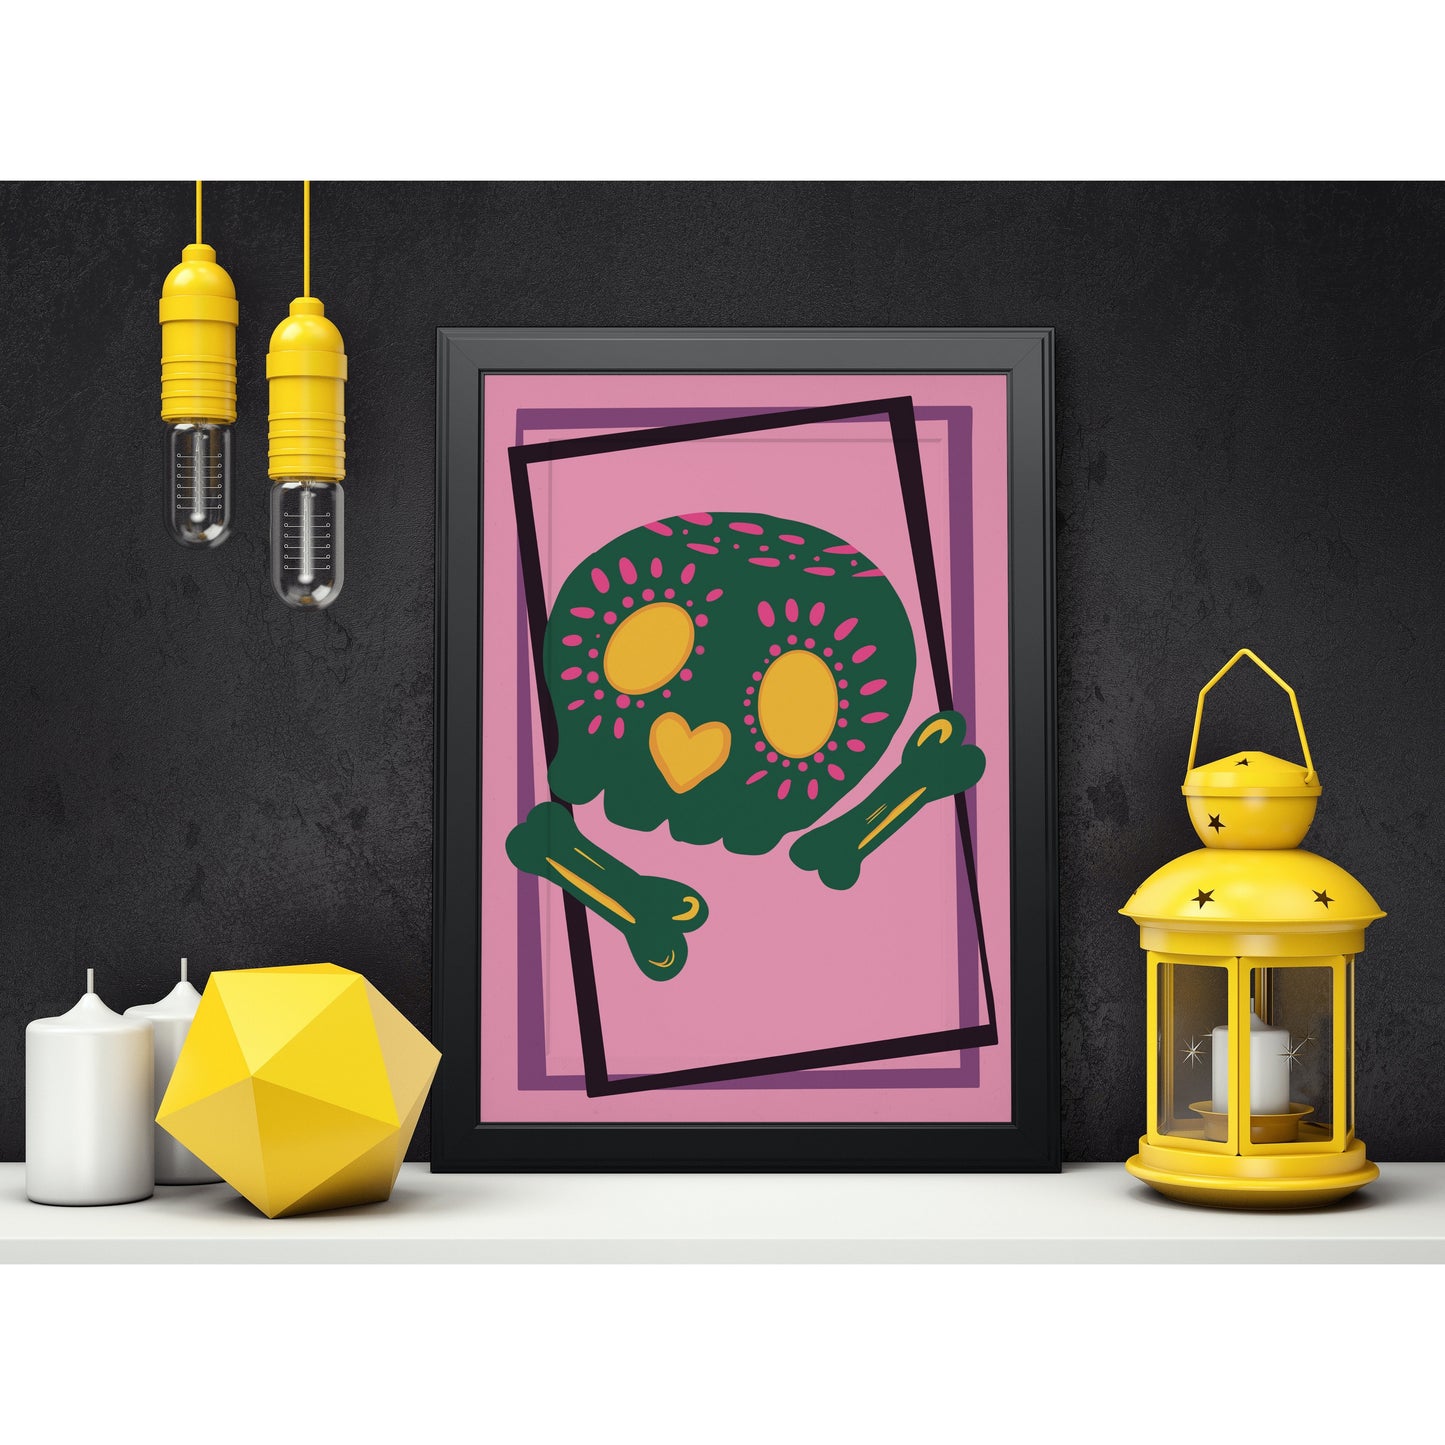 Add some personality to your home this Halloween with the Skull and Bones Art Print. This quirky and colourful print is perfect for anyone who loves skulls or is looking for a fun and funky decoration.